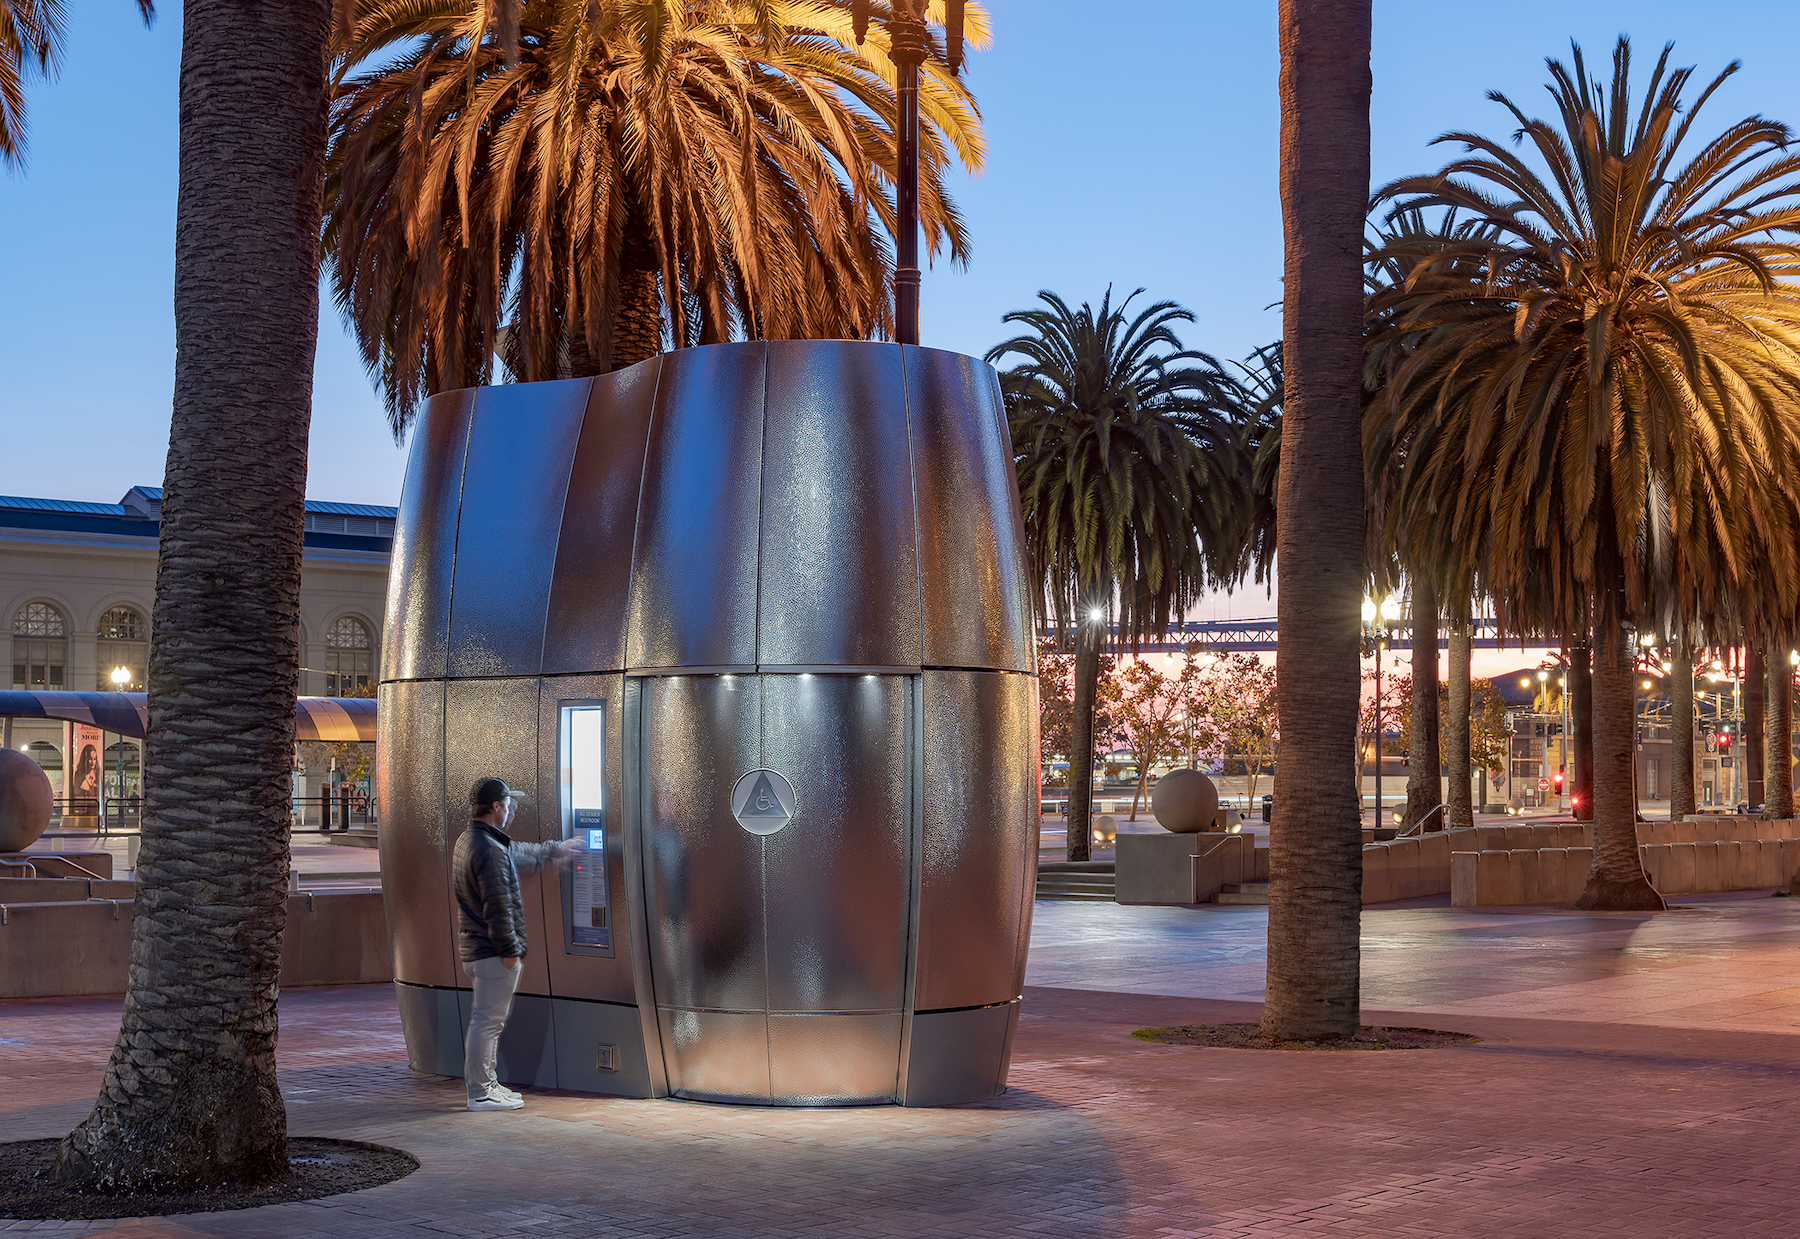 A stainless steel pod houses a public restroom that's being tested in San Francisco.